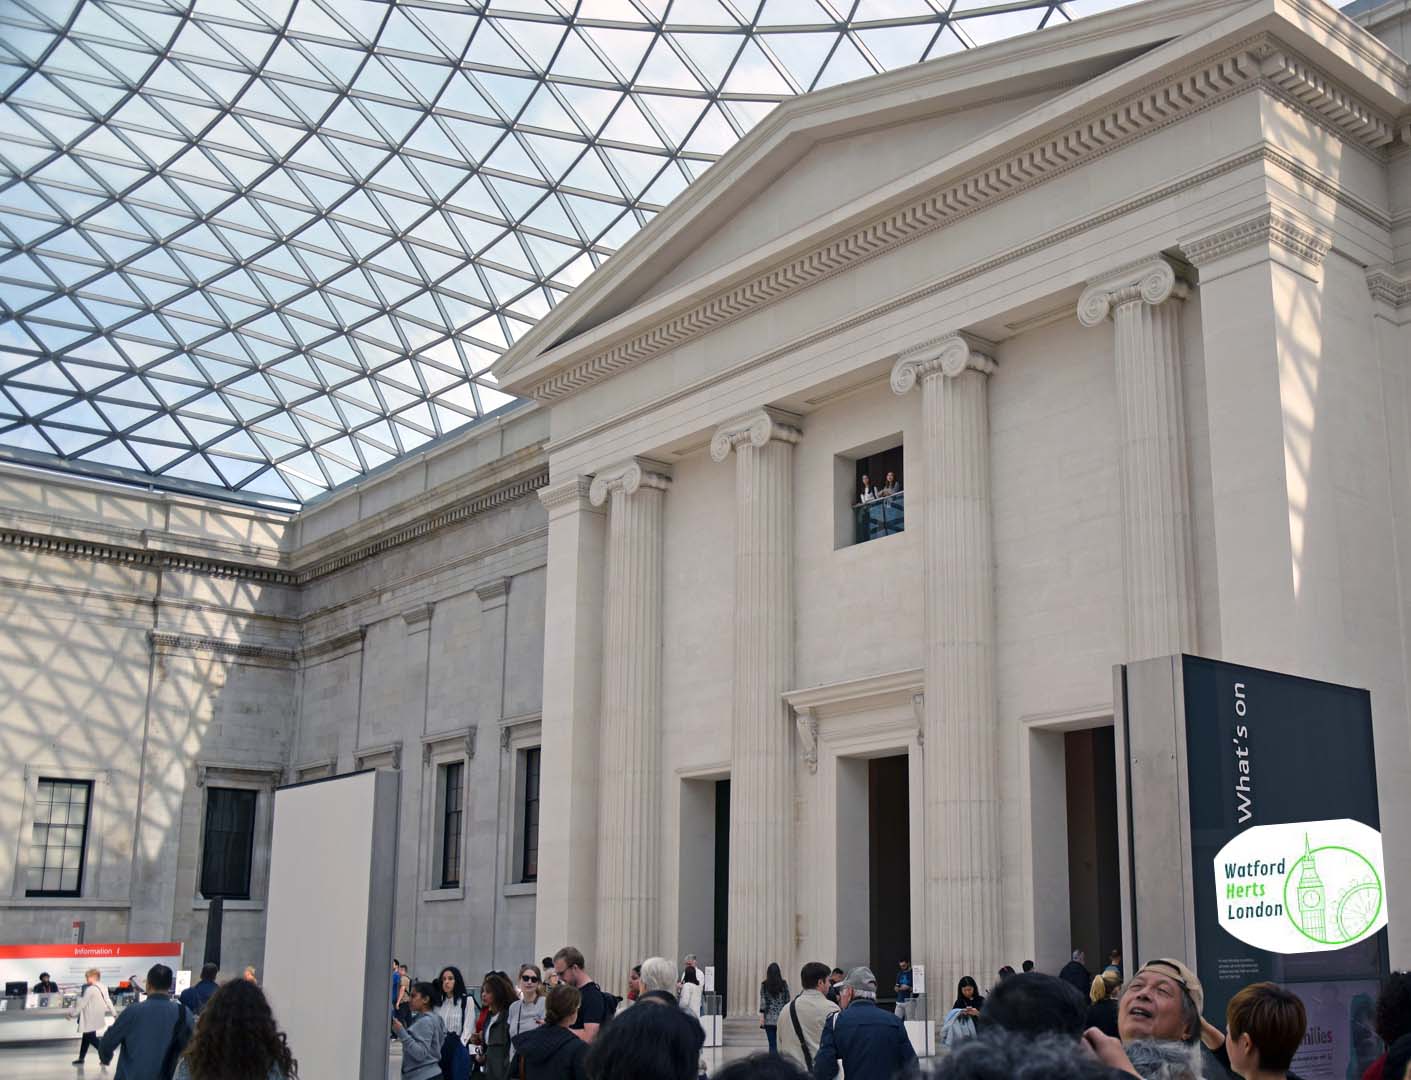 The British Museum, located in the Bloomsbury area of London